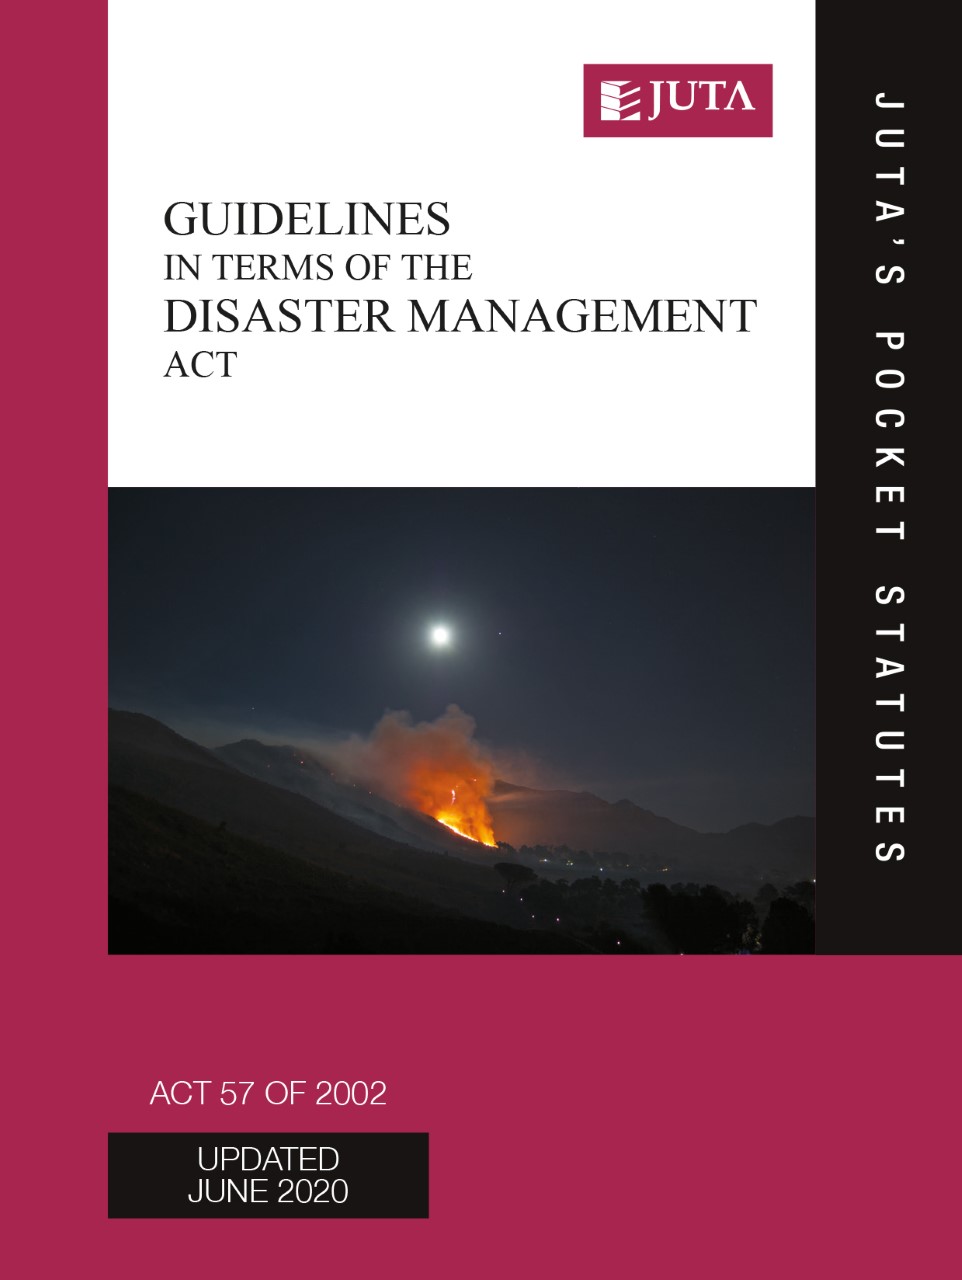 Guidelines in terms of the Disaster Management Act 57 of 2002